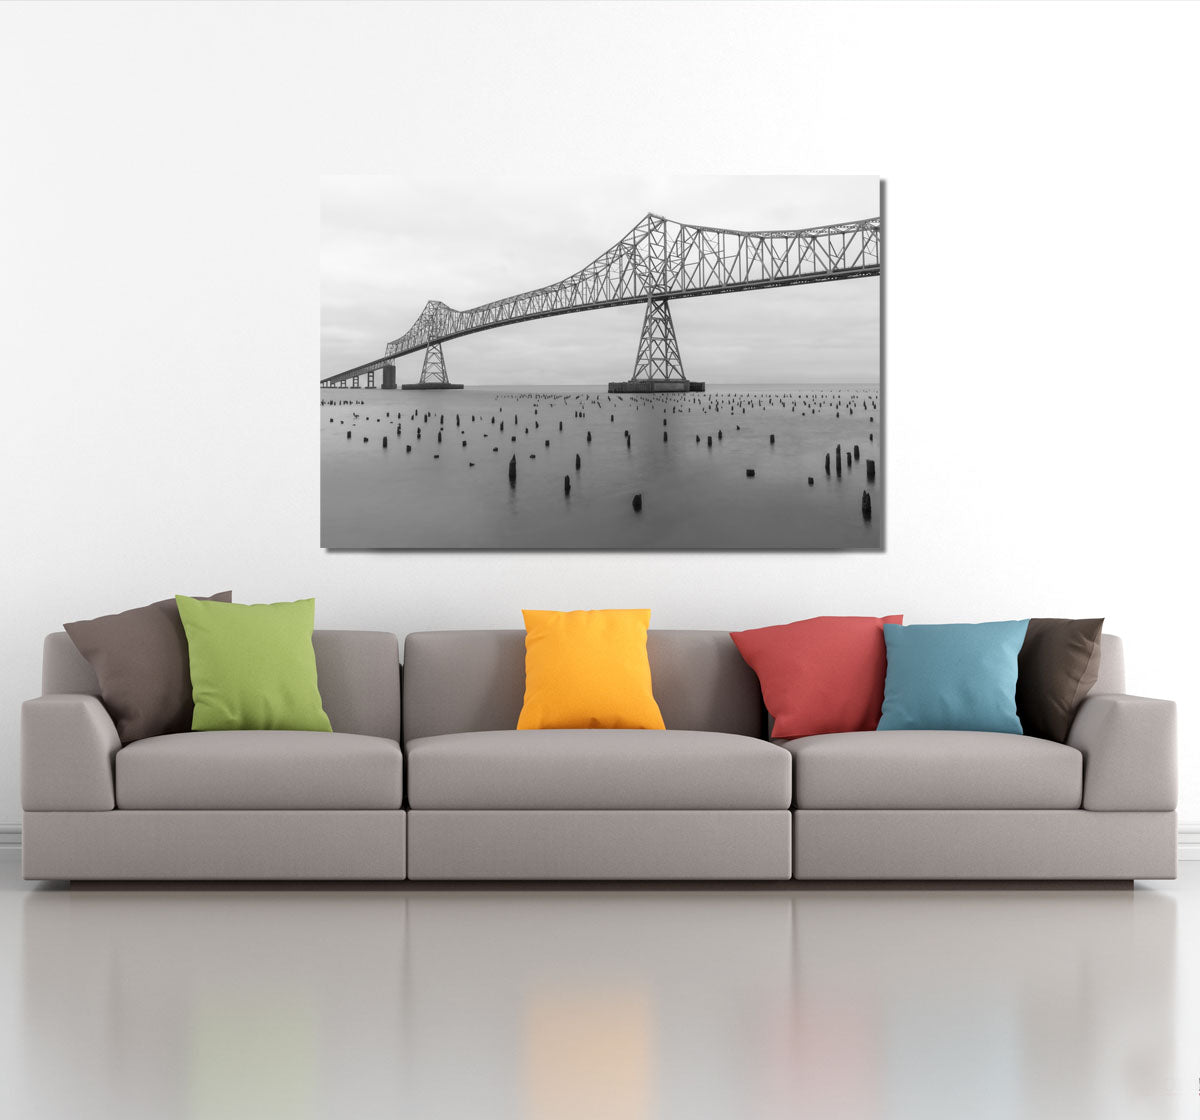 Photograph of a bridge super imposed over a couch as if the artwork were purchased and hanging in a living room.  Clicking here takes you to a collection of black and white images.